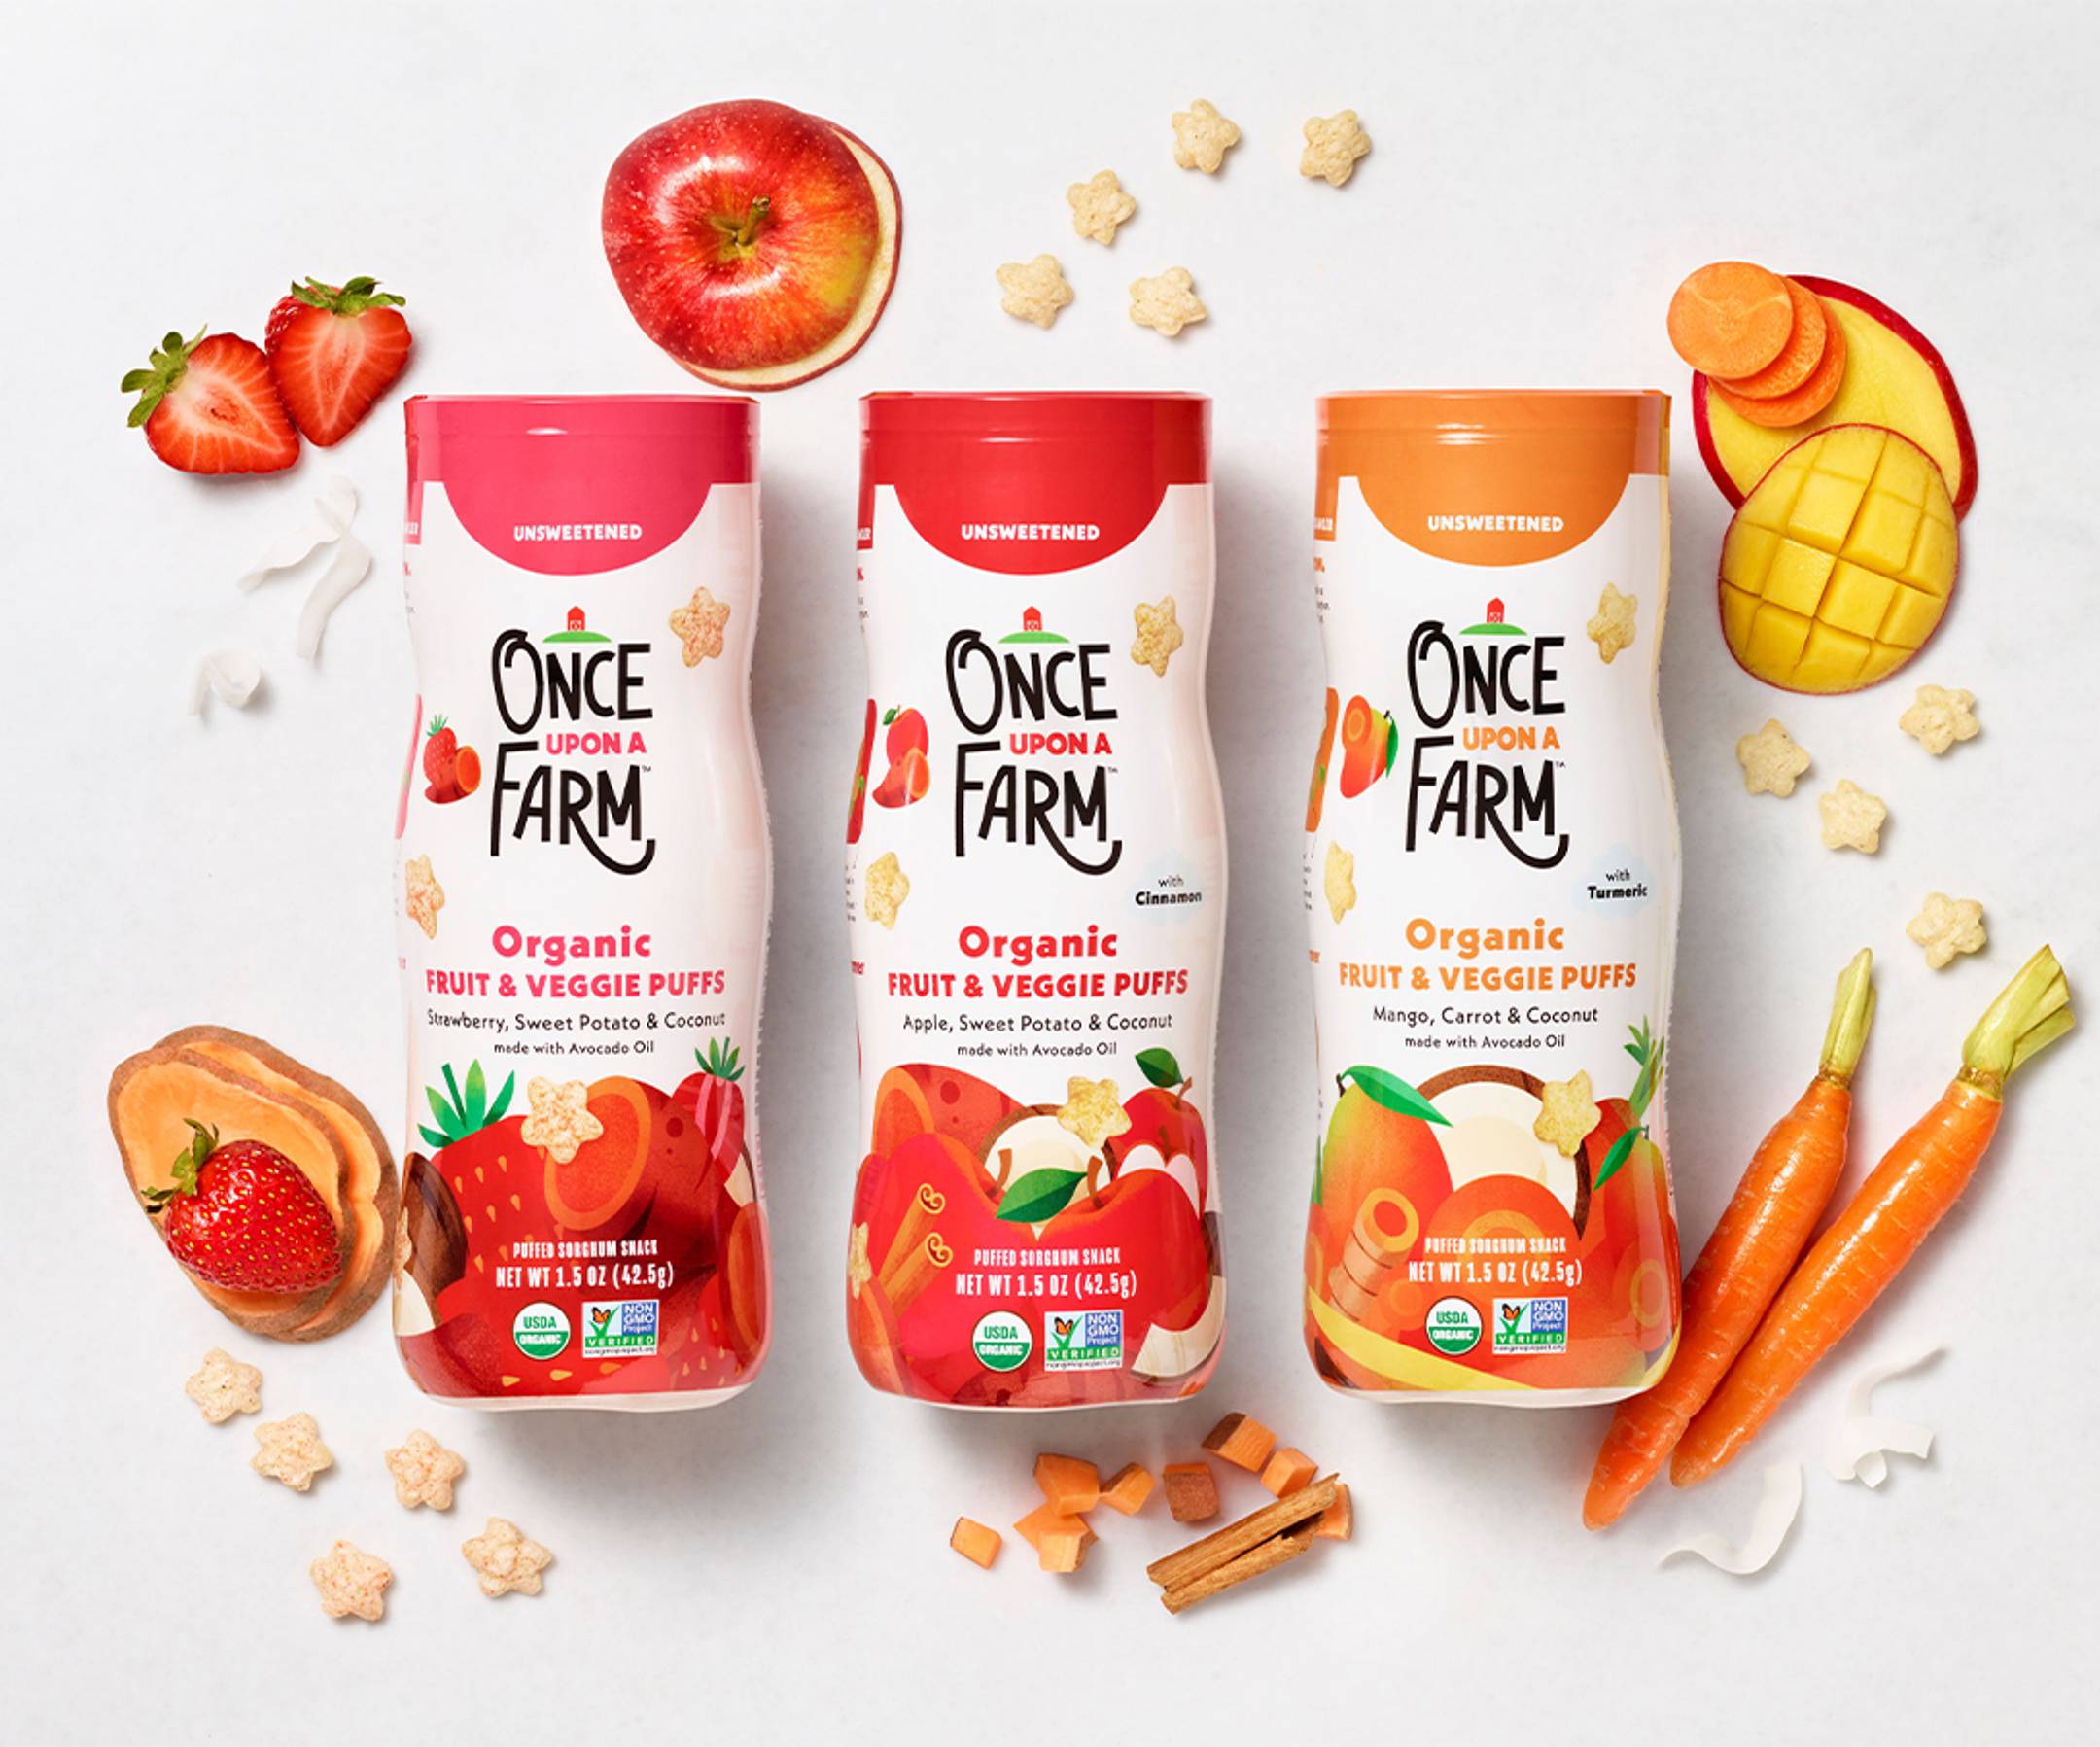 Image of our new baby & toddler pantry snack - fruit & veggie puffs shot in a studio in 3 flavors: Strawberry, Sweet Potato & Coconut, Apple, Sweet Potato & Coconut, and Mango, Carrot & Coconut. With real fruit and veggie ingredients in the background. 